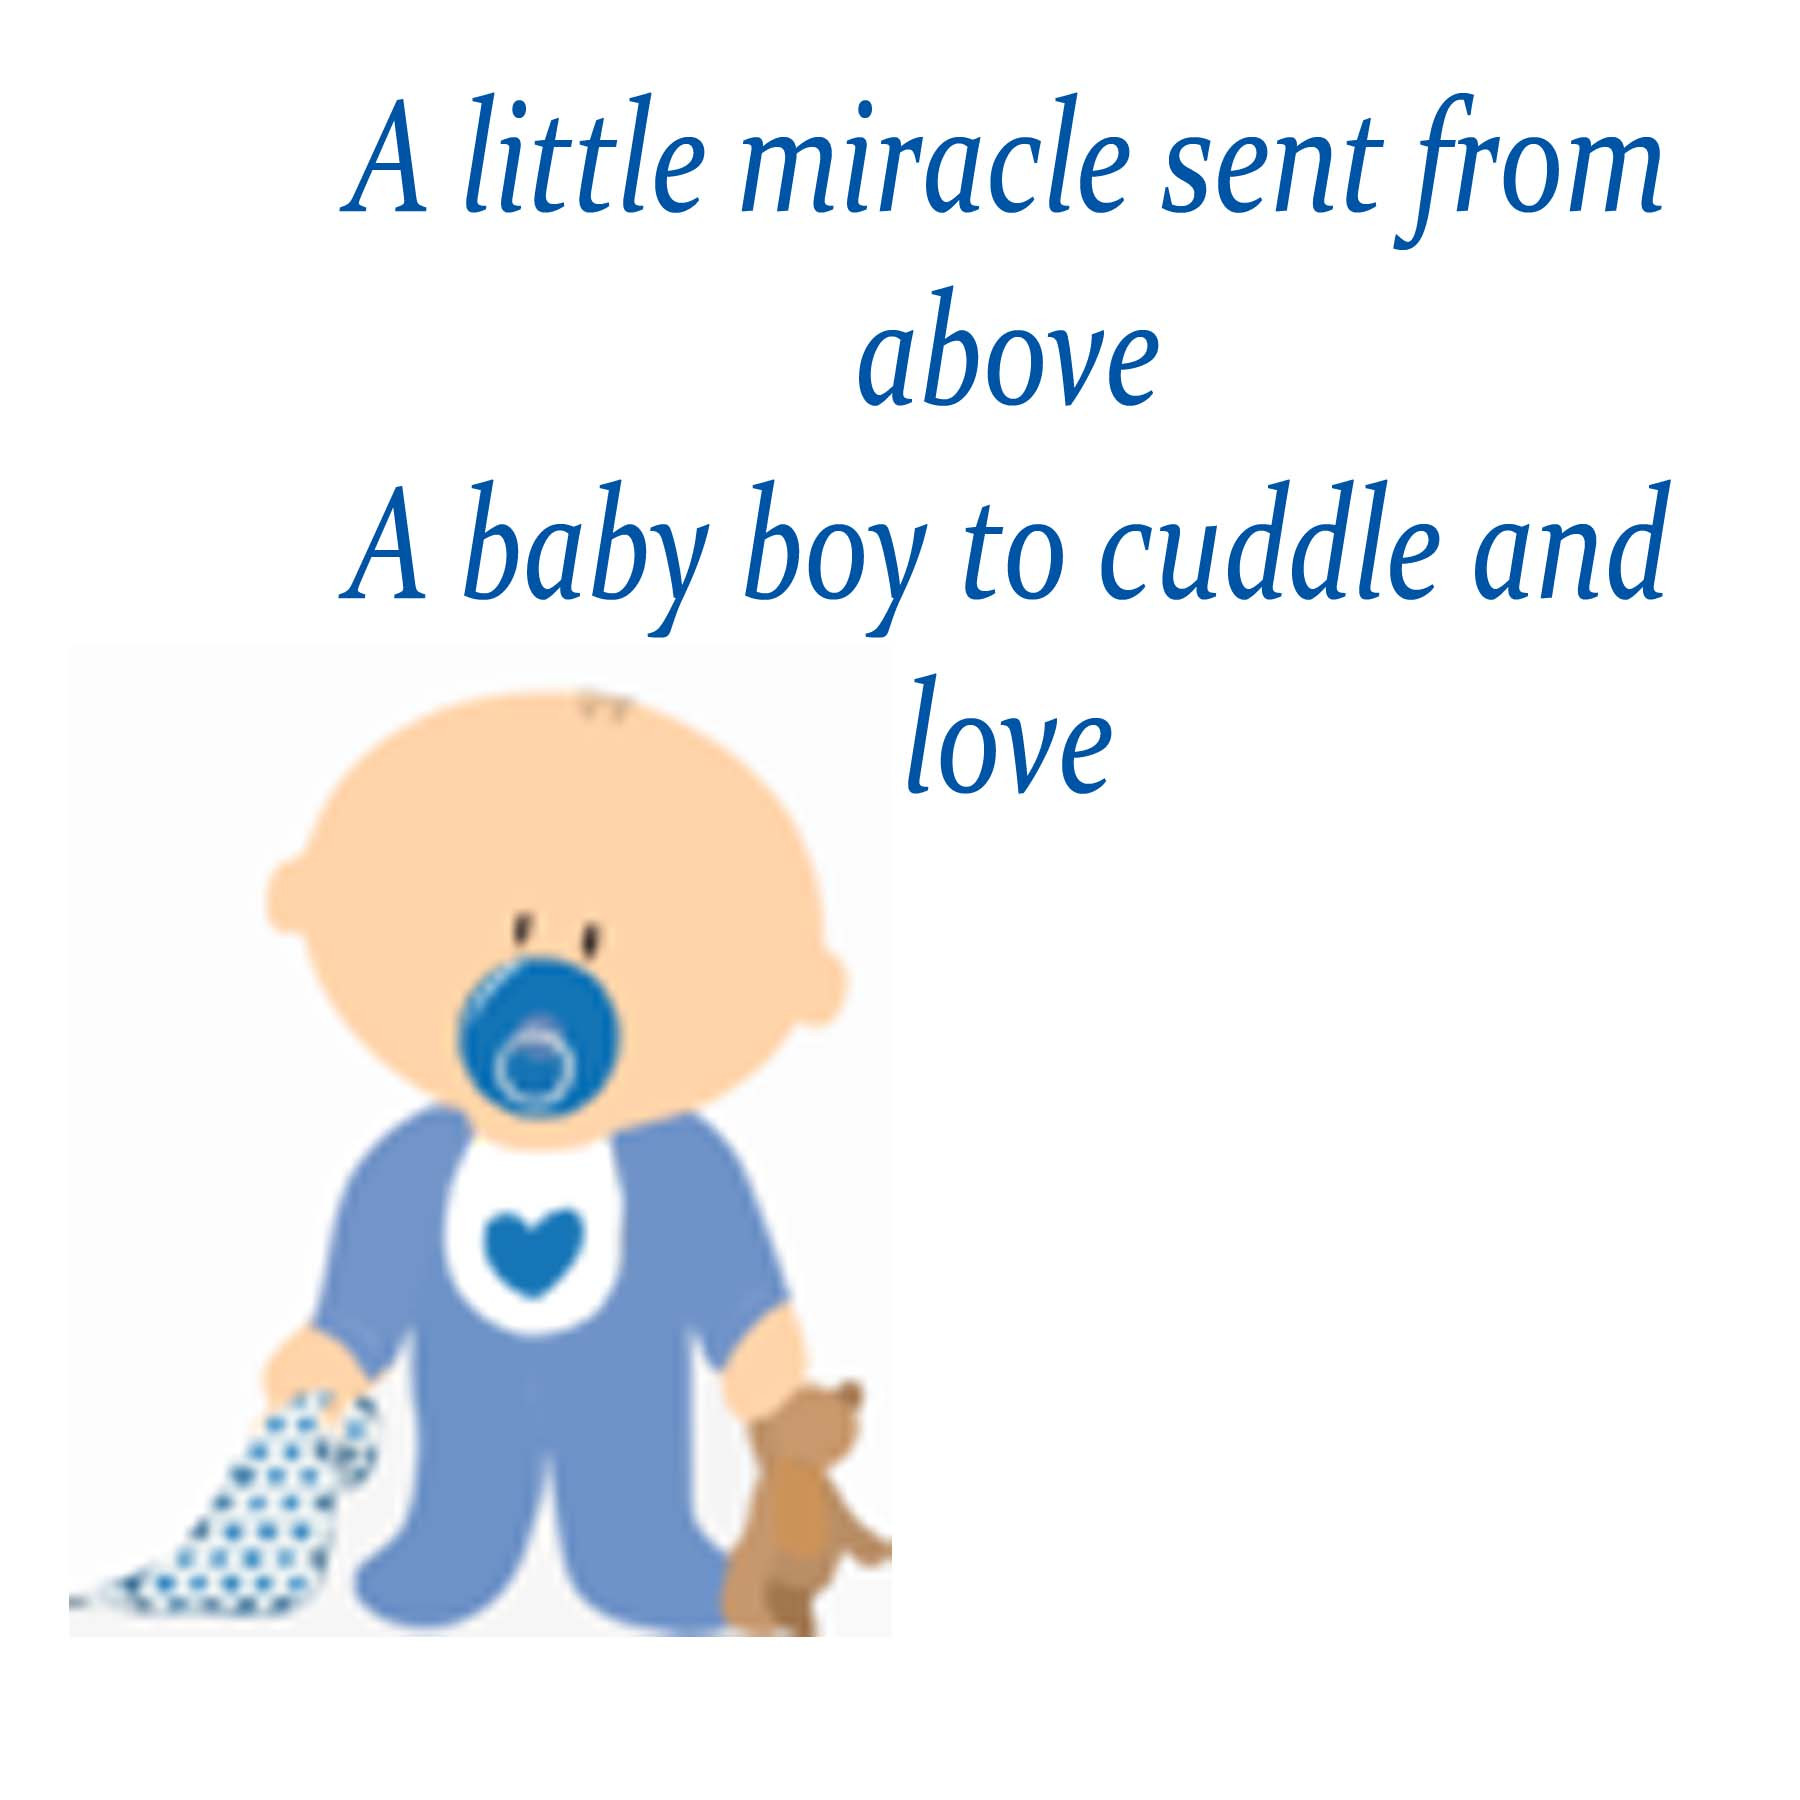 Quotes About Having A Baby Boy
 Baby boy poems for baby shower